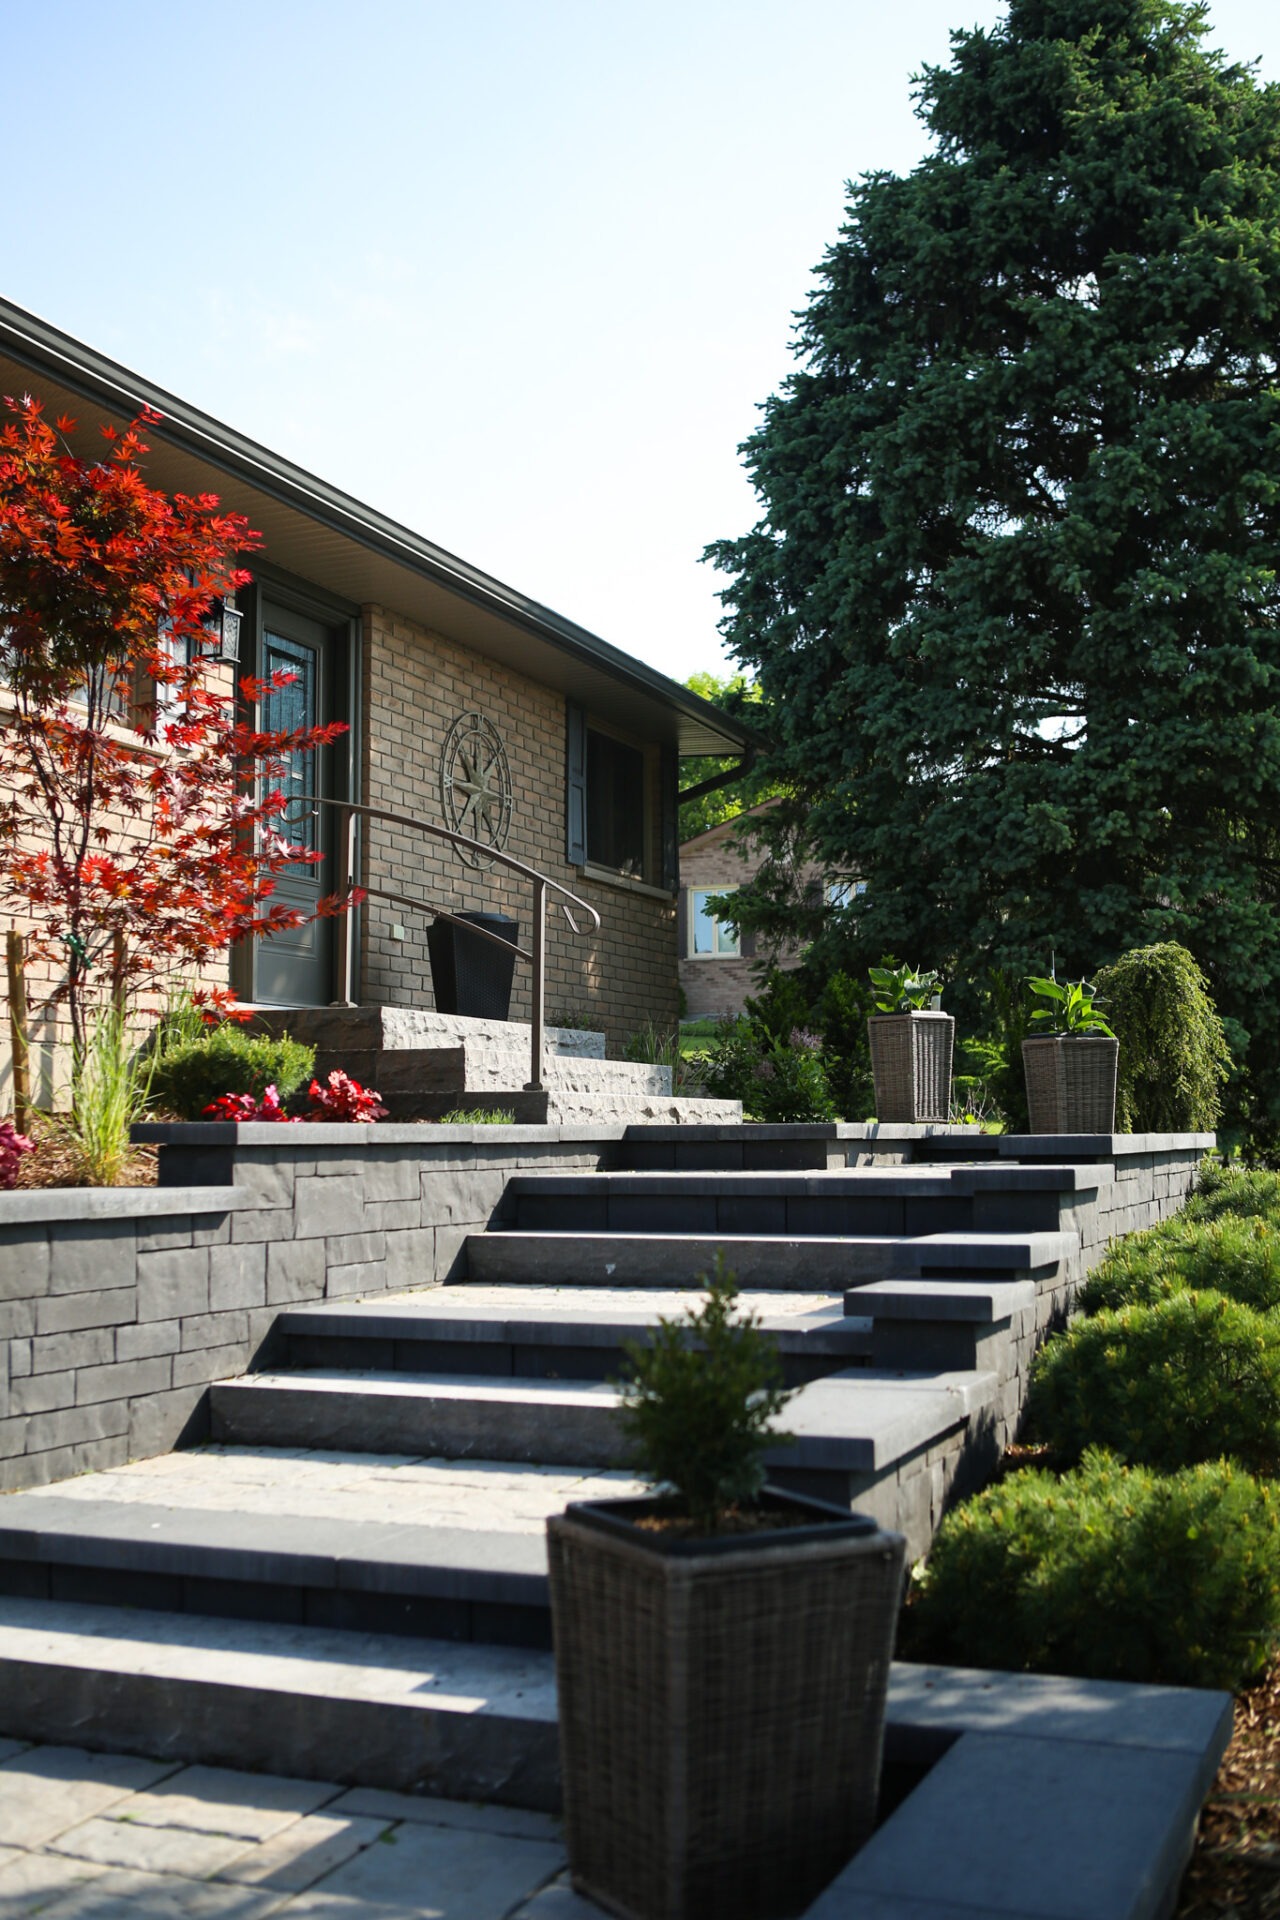 A brick house with stylish dark stone steps leading to the entrance, flanked by plants, under a clear blue sky. A large conifer stands nearby.